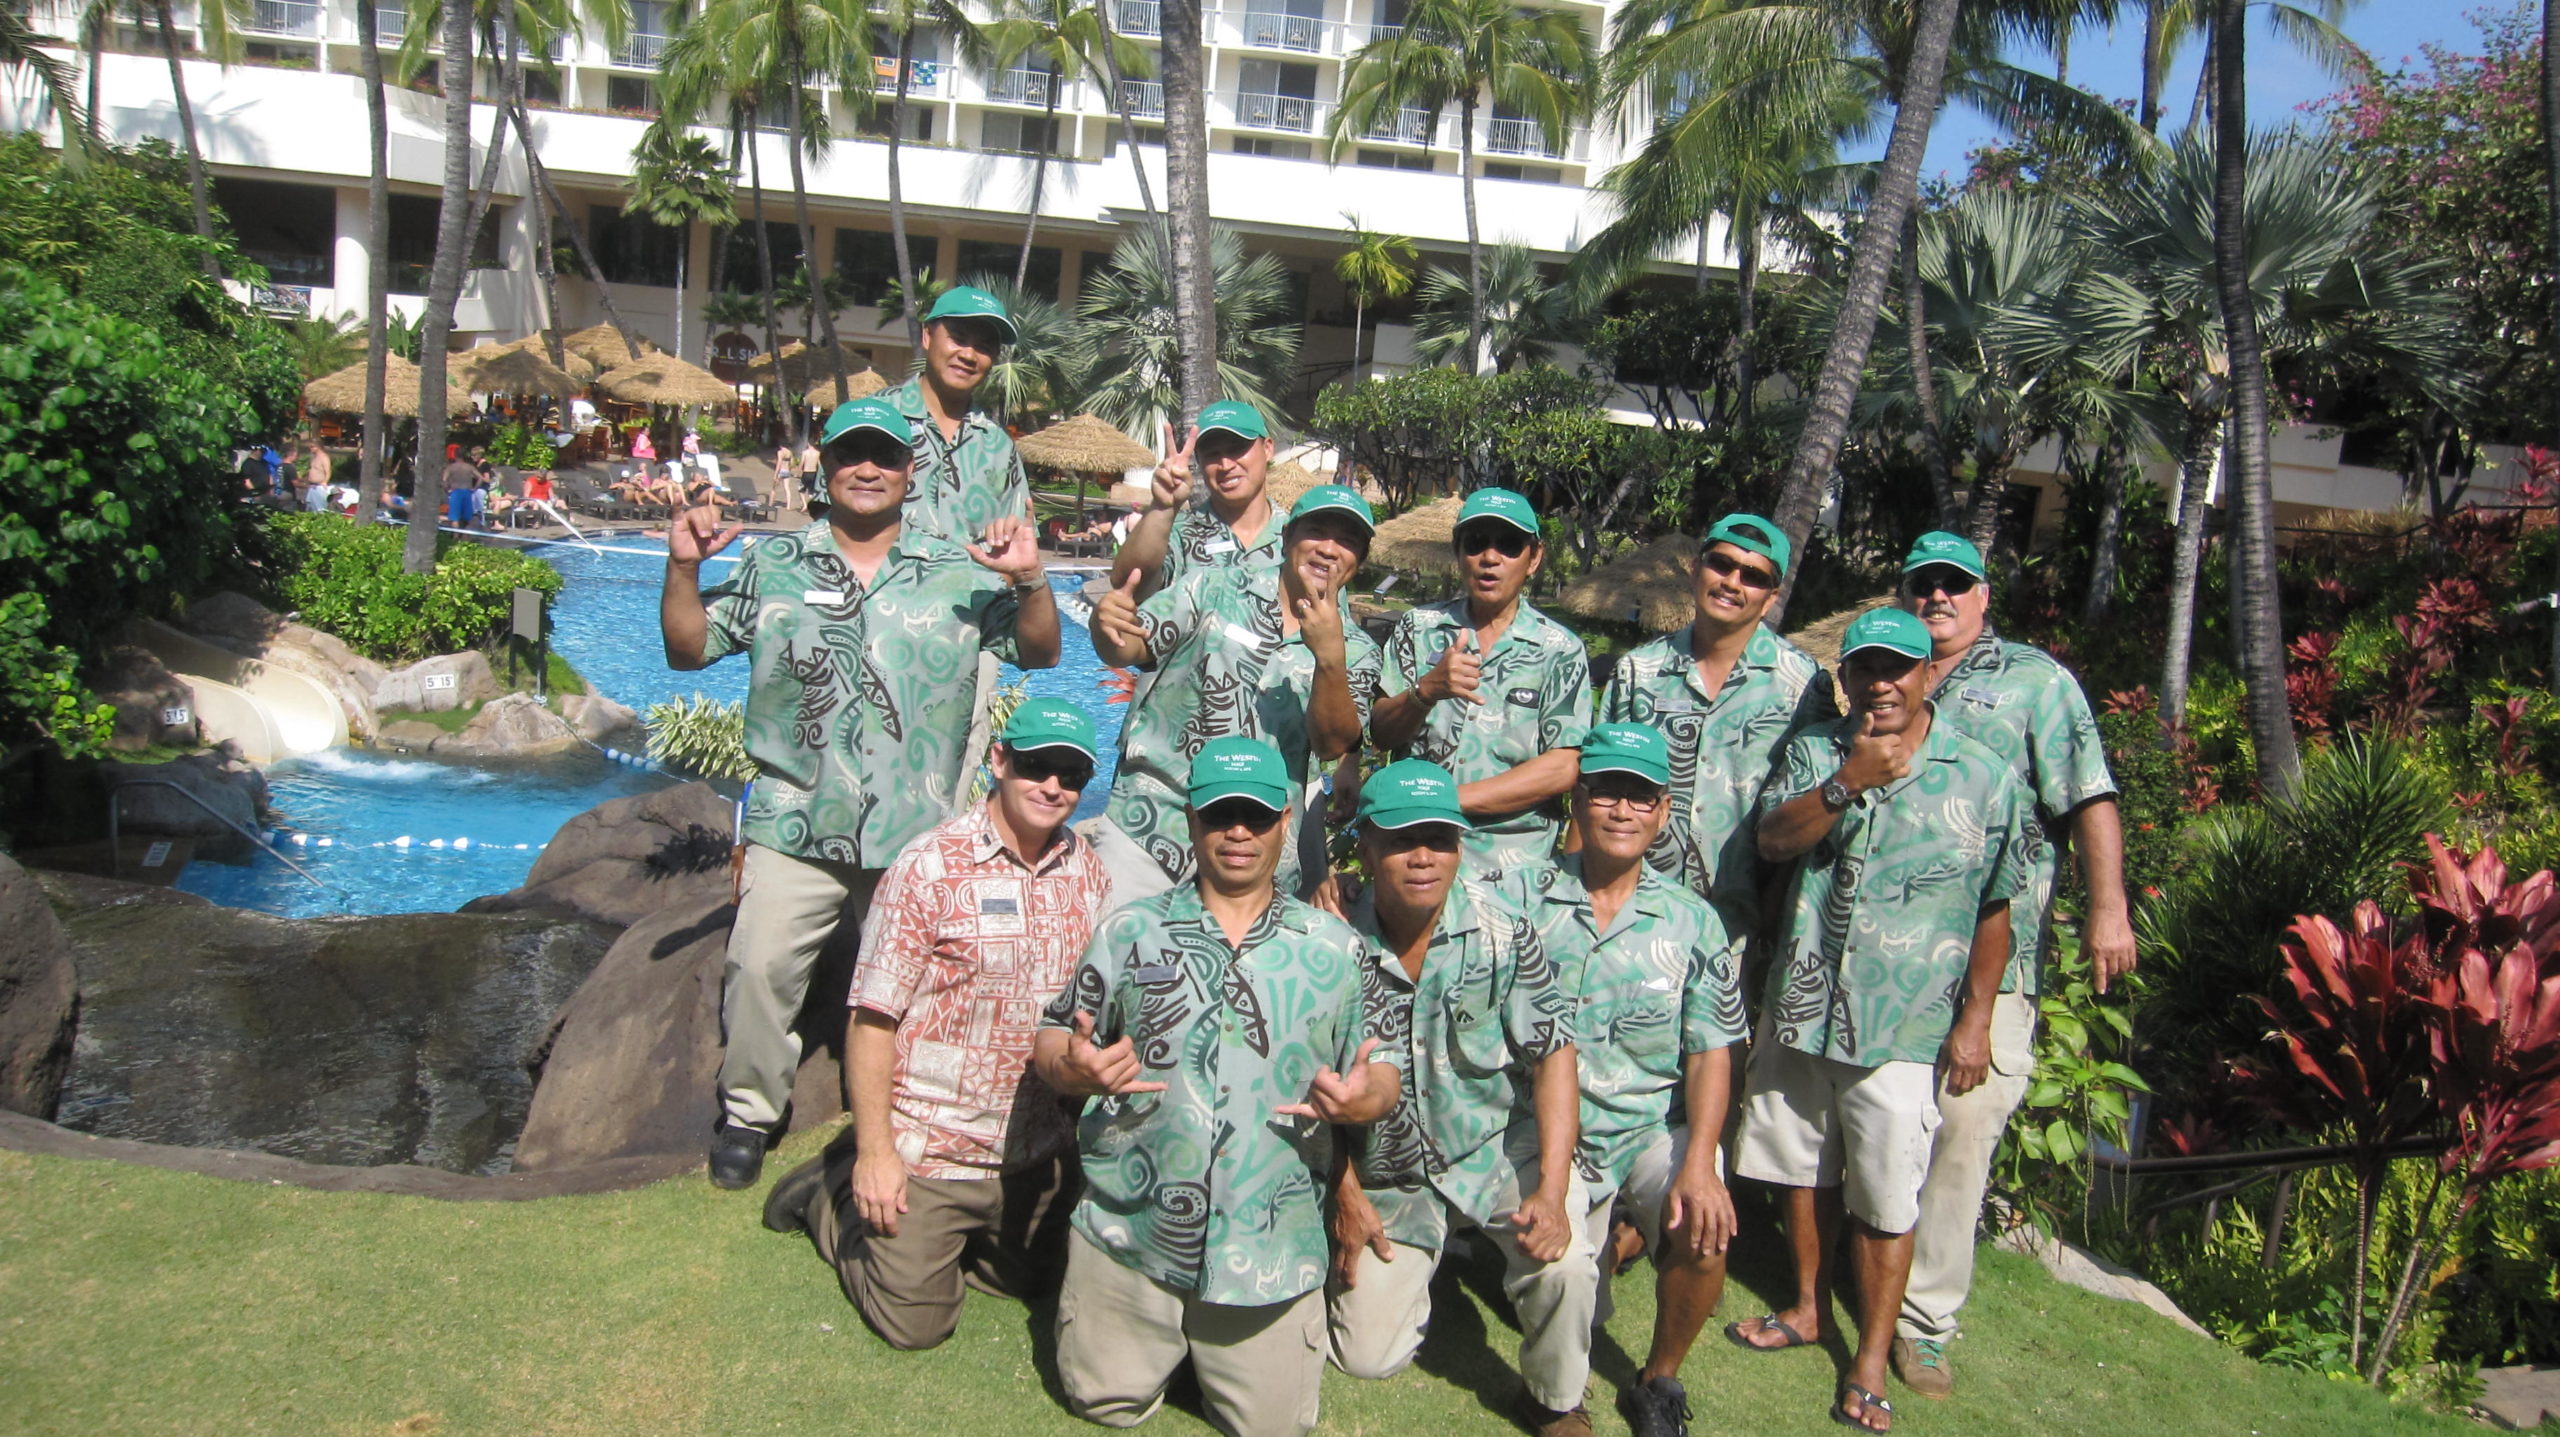 Duane Sparkman and his landscaping team at The Westin Maui Resort & Spa are doing great things to reduce their environmental impacts